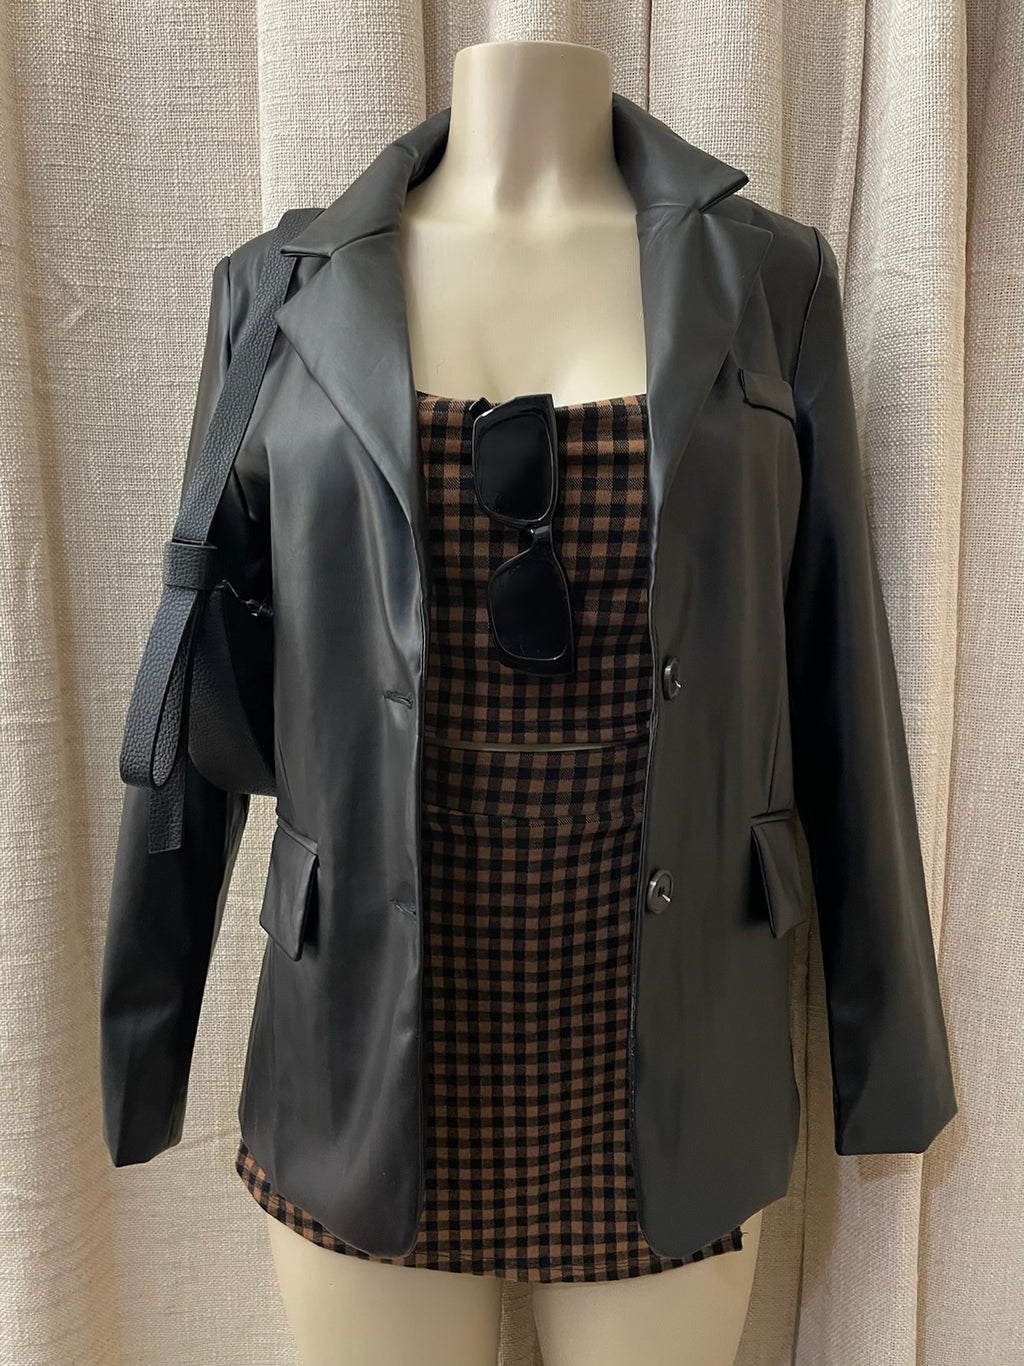 The “Booked & Busy” Faux Leather Jackey